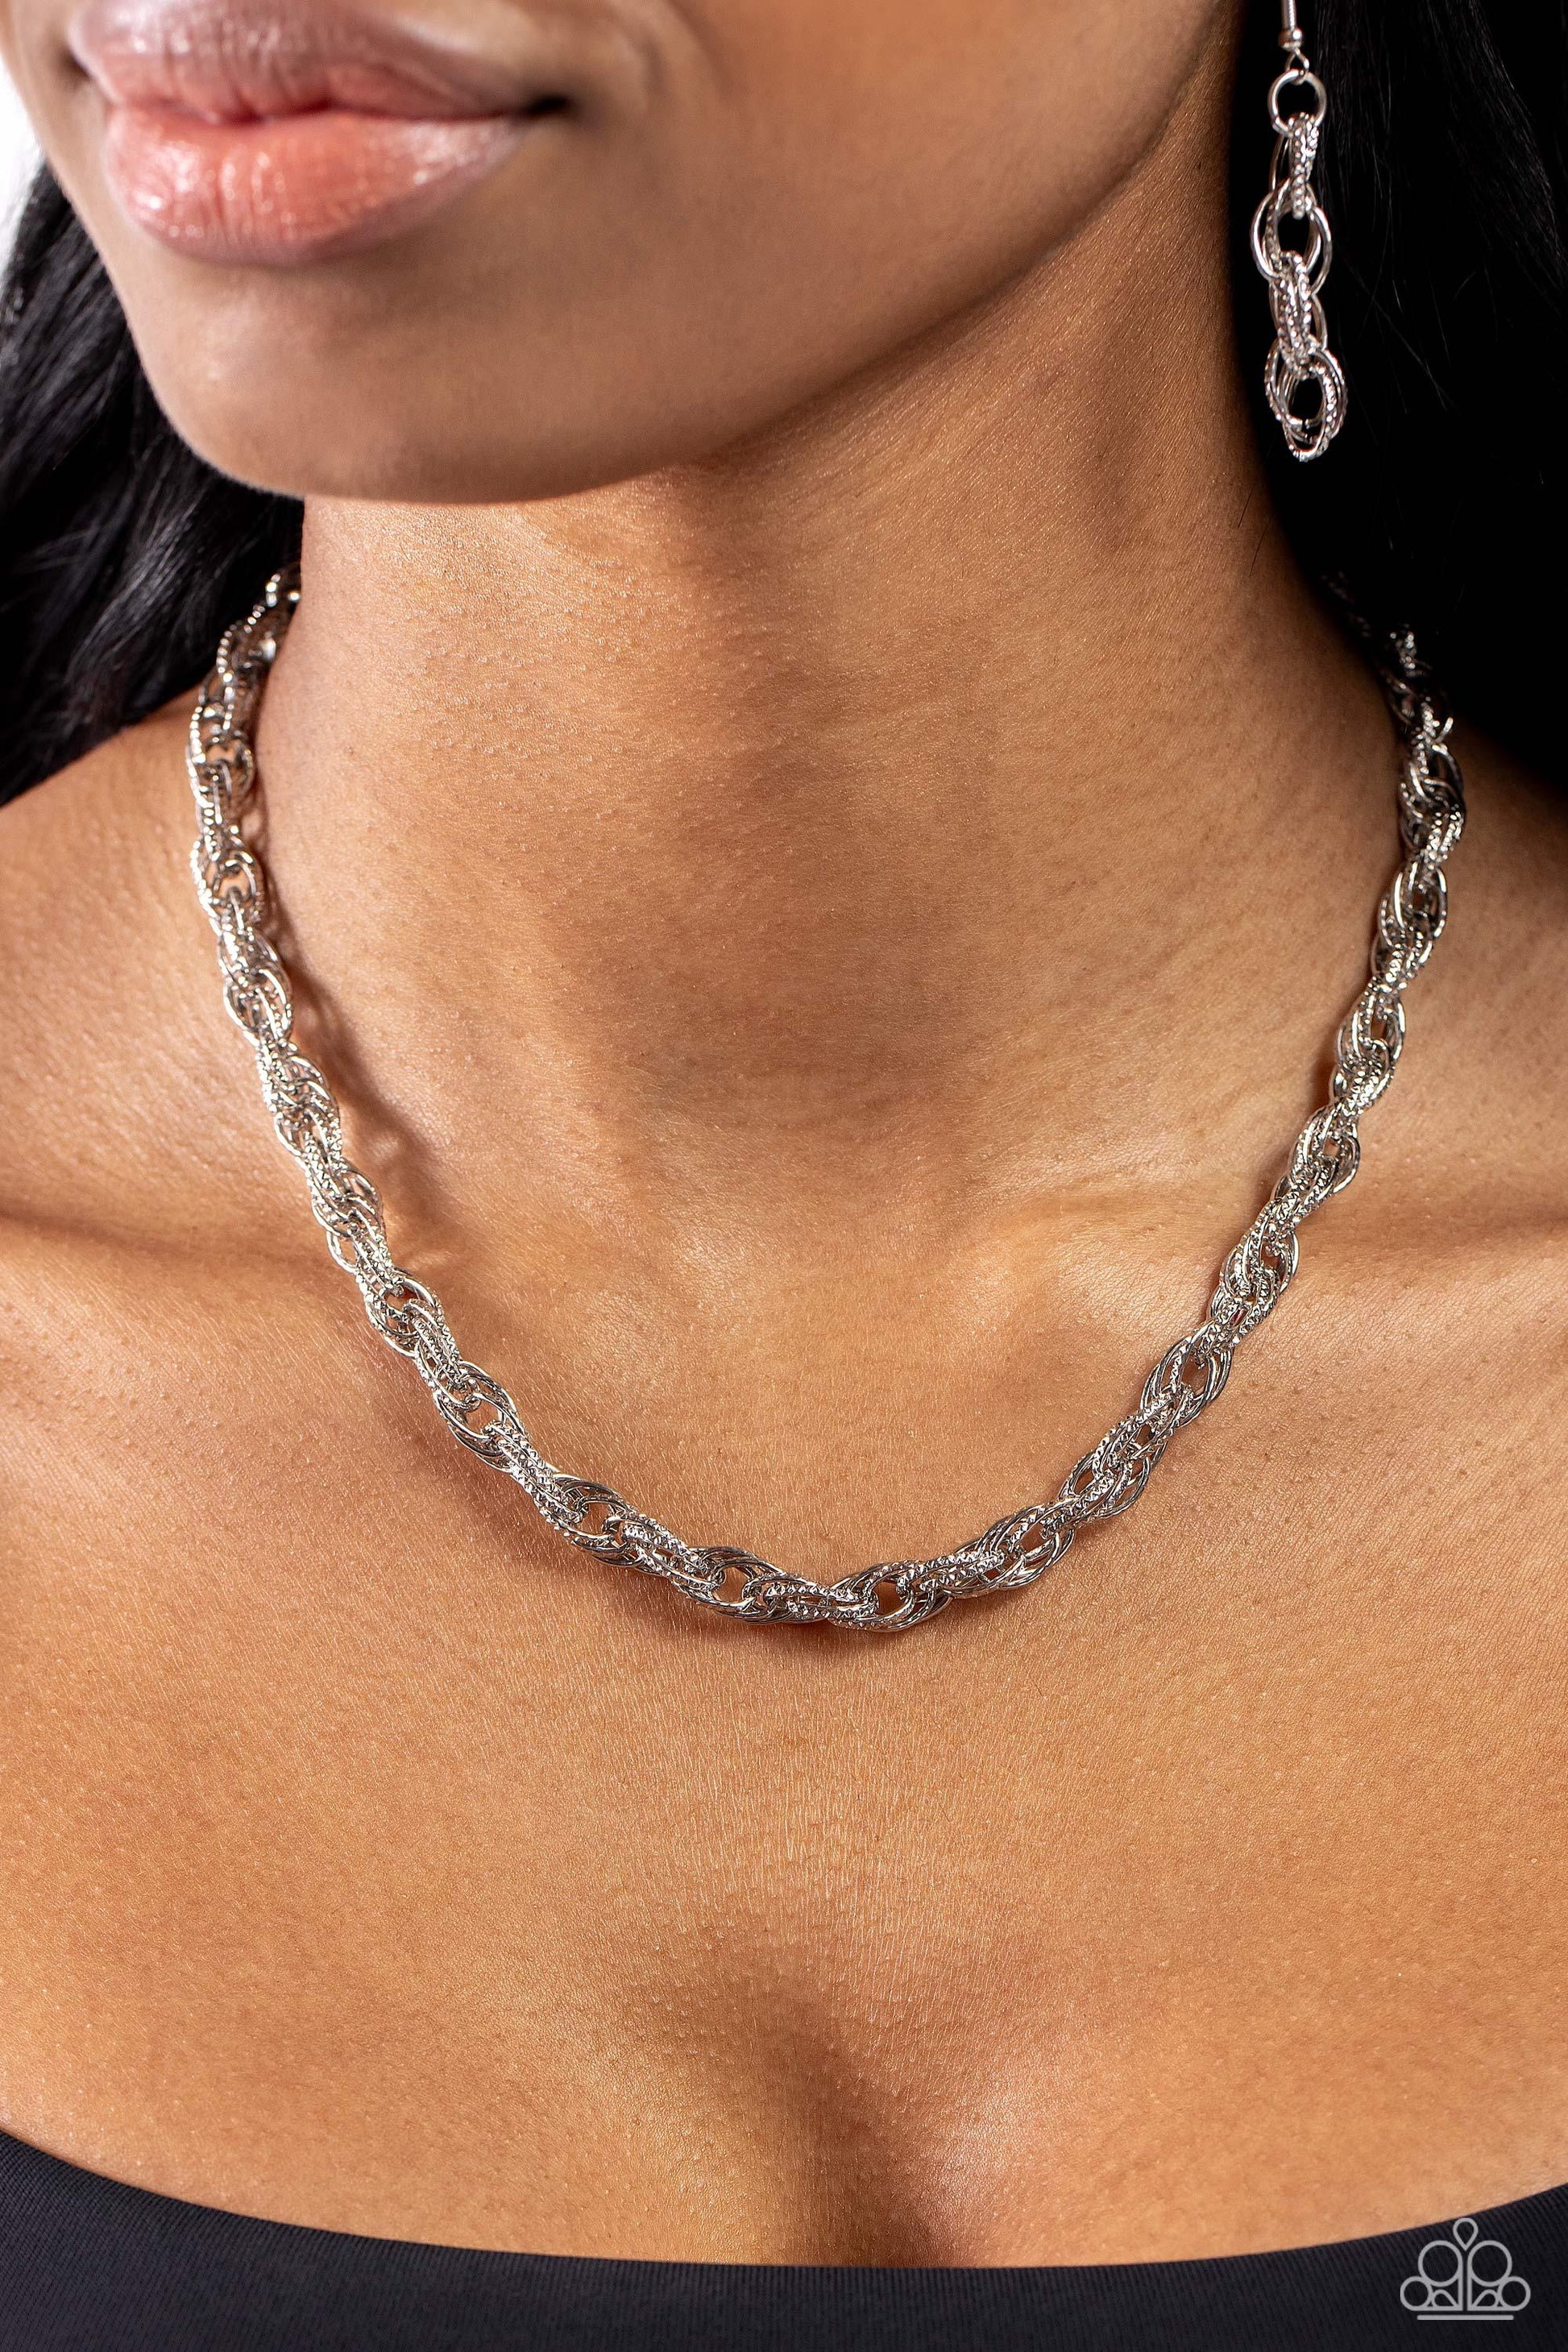 Paparazzi Accessories - Braided Ballad - Silver Necklace - Bling by JessieK